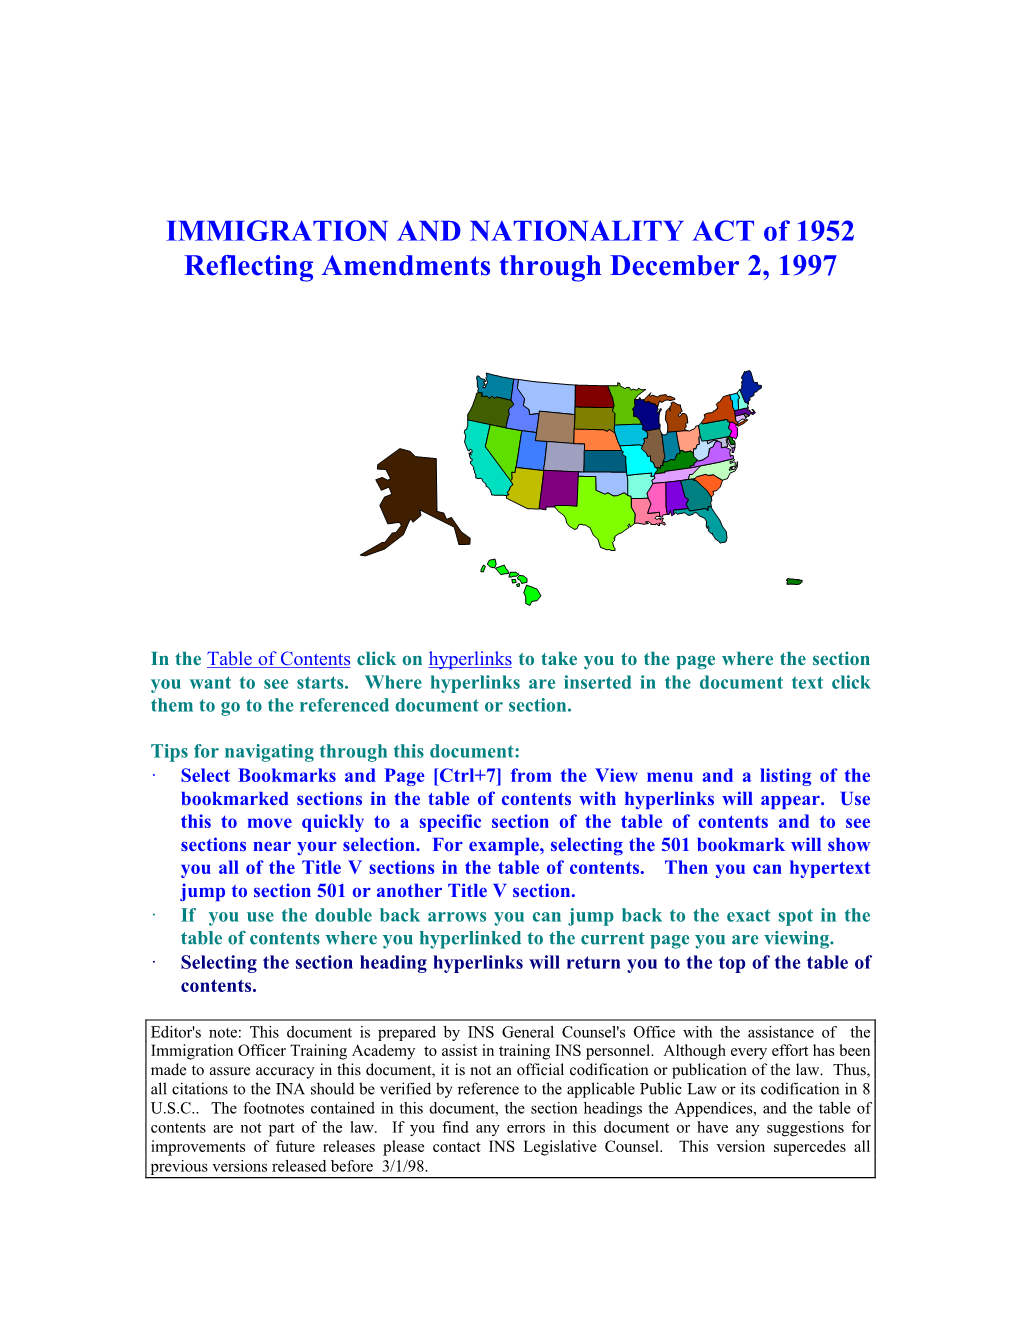 IMMIGRATION and NATIONALITY ACT of 1952 Reflecting Amendments Through December 2, 1997